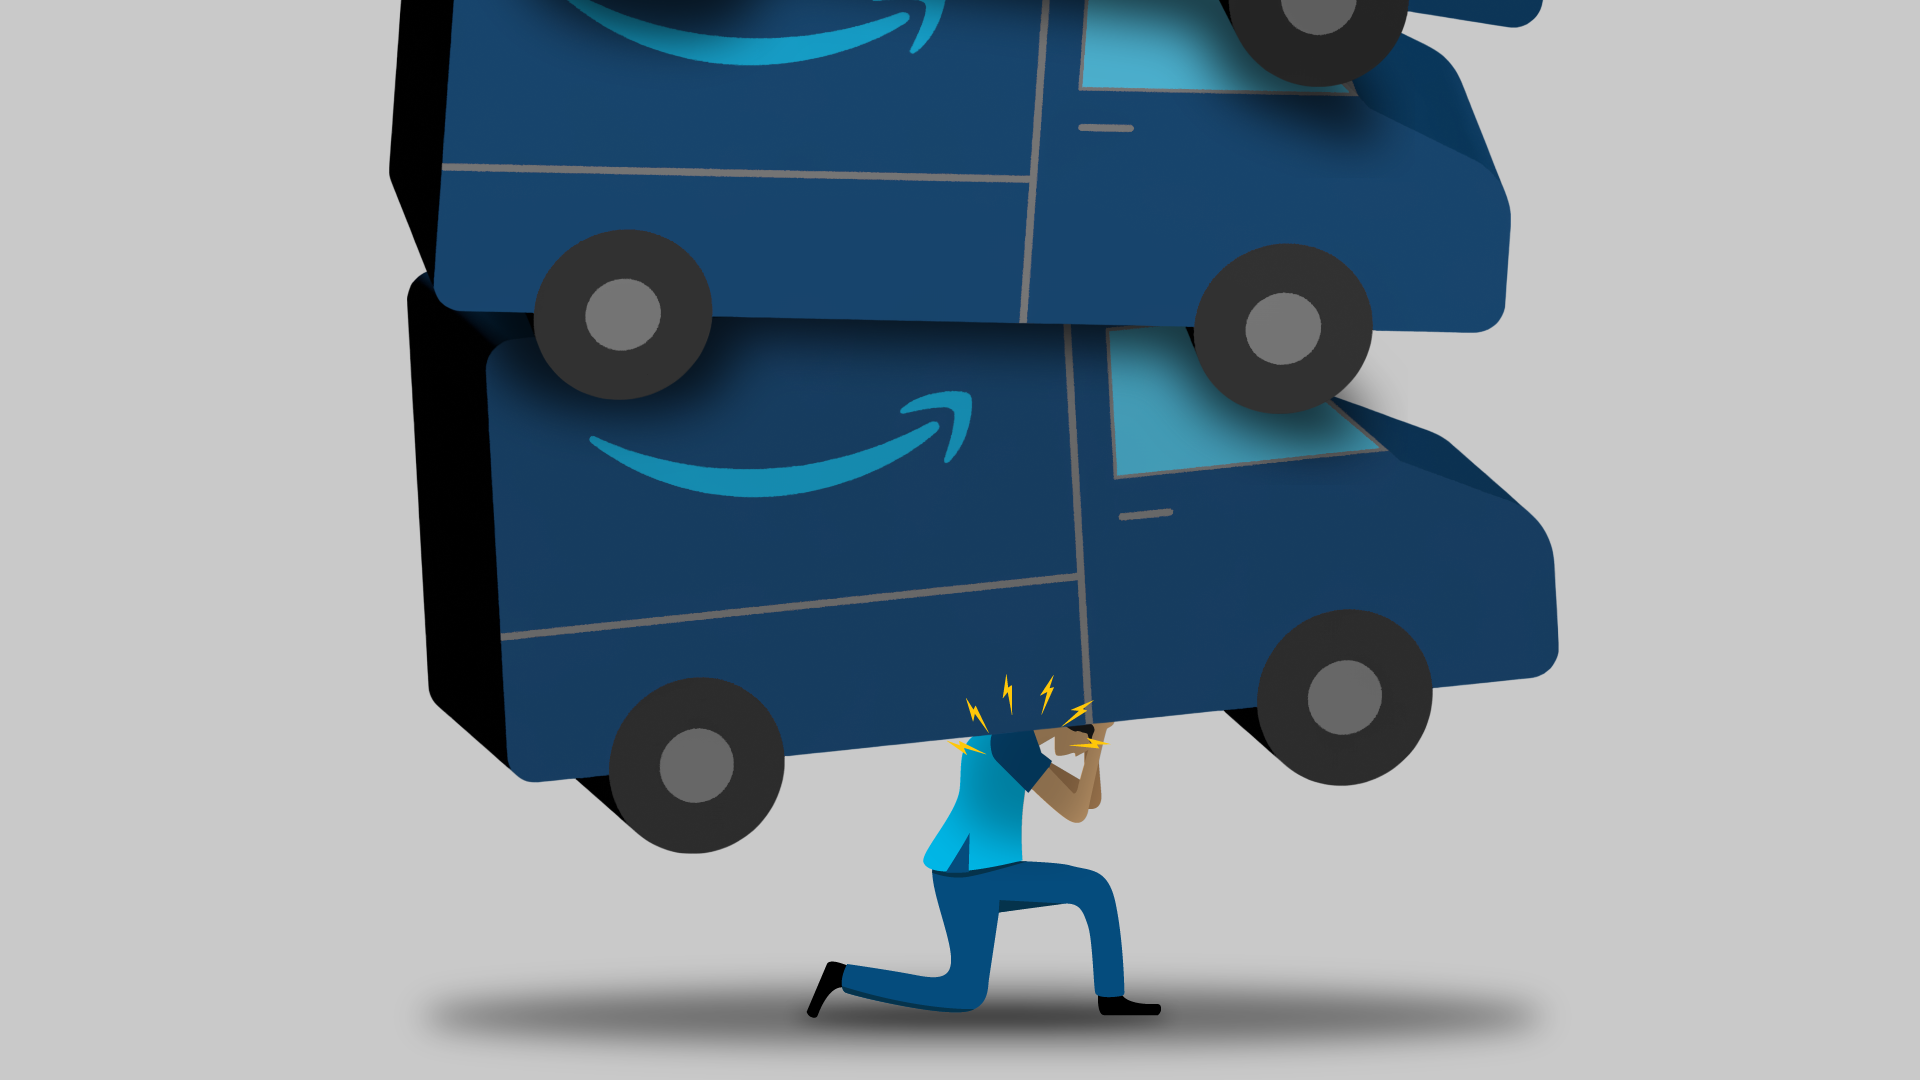 Amazon's delivery program is closer to a nightmare for many - Protocol